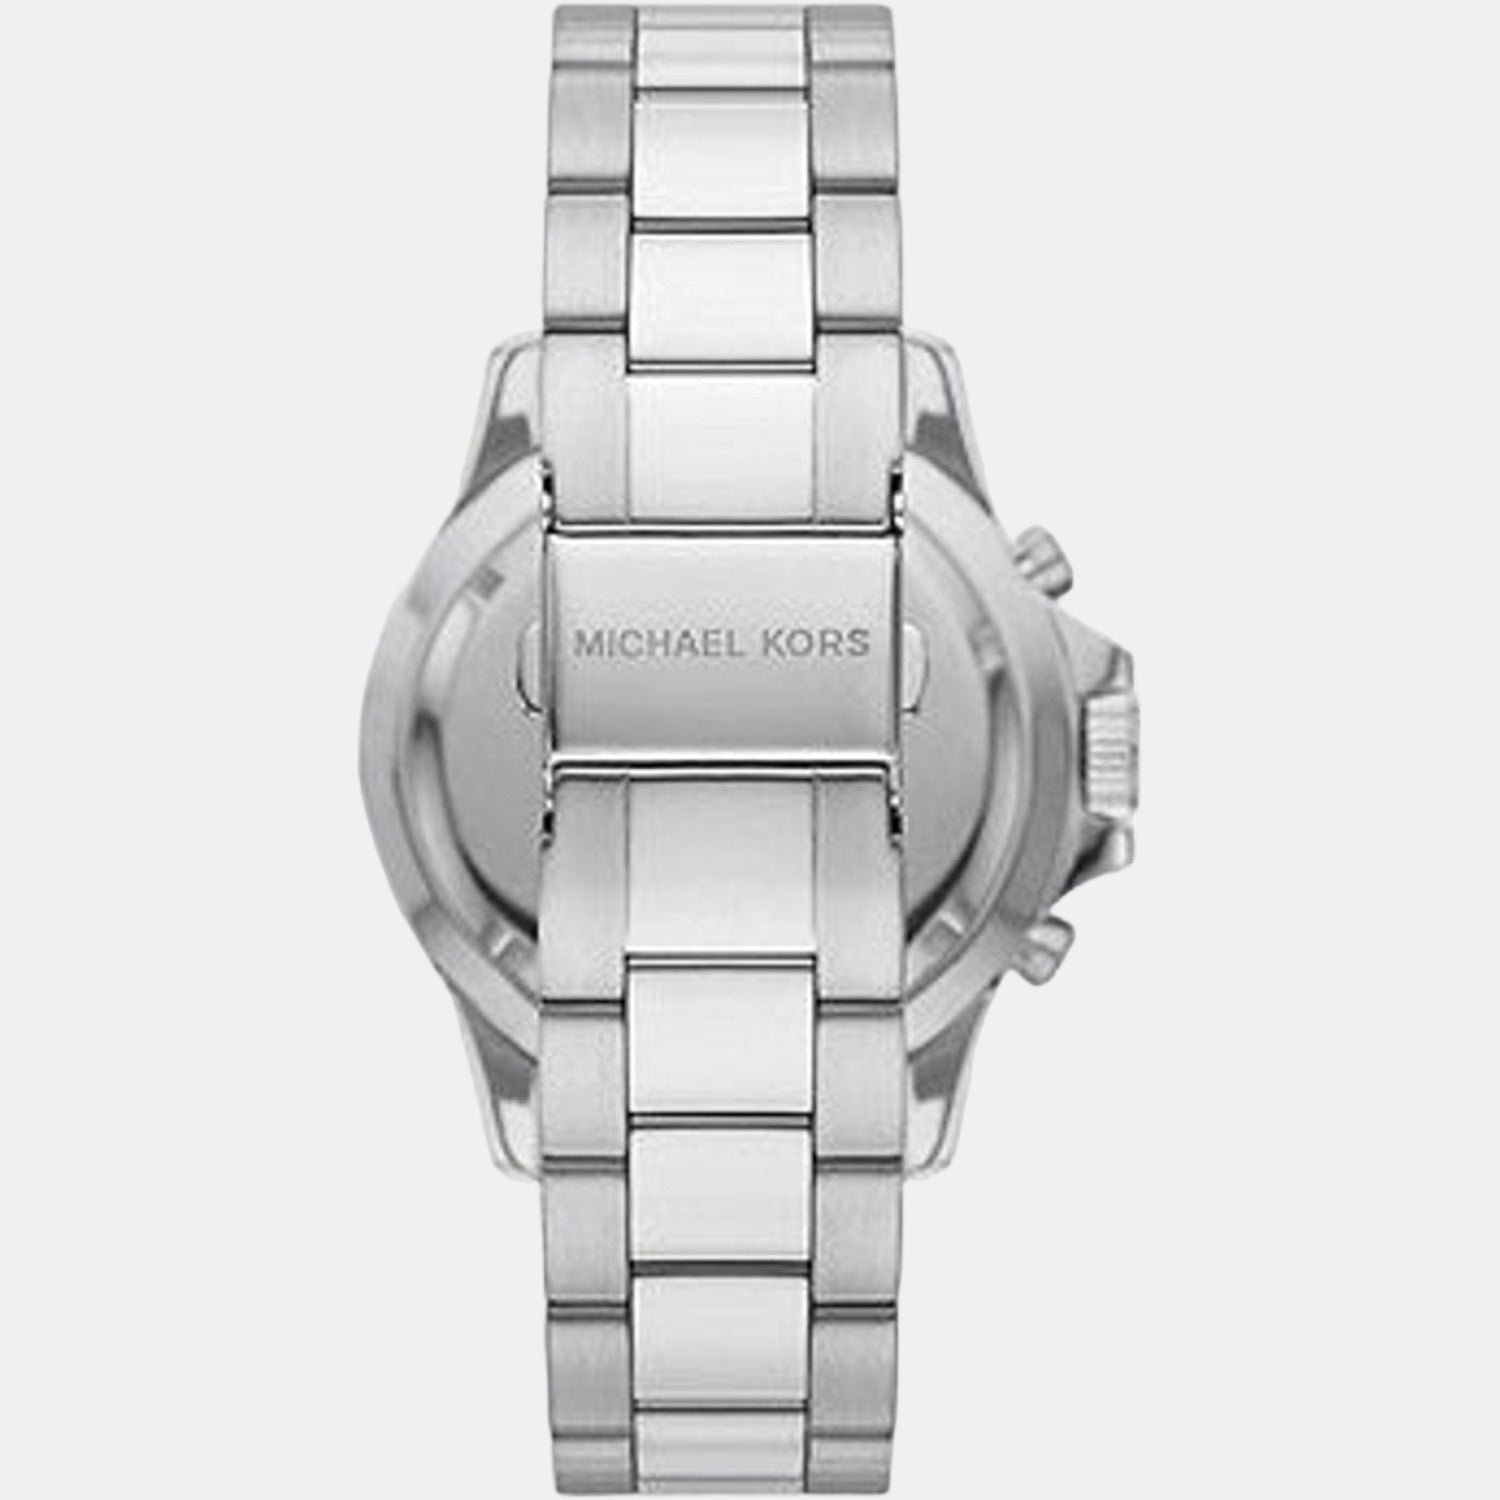 In – Michael Kors Analog Michael Kors | Steel Just Watch Male Stainless Time Black